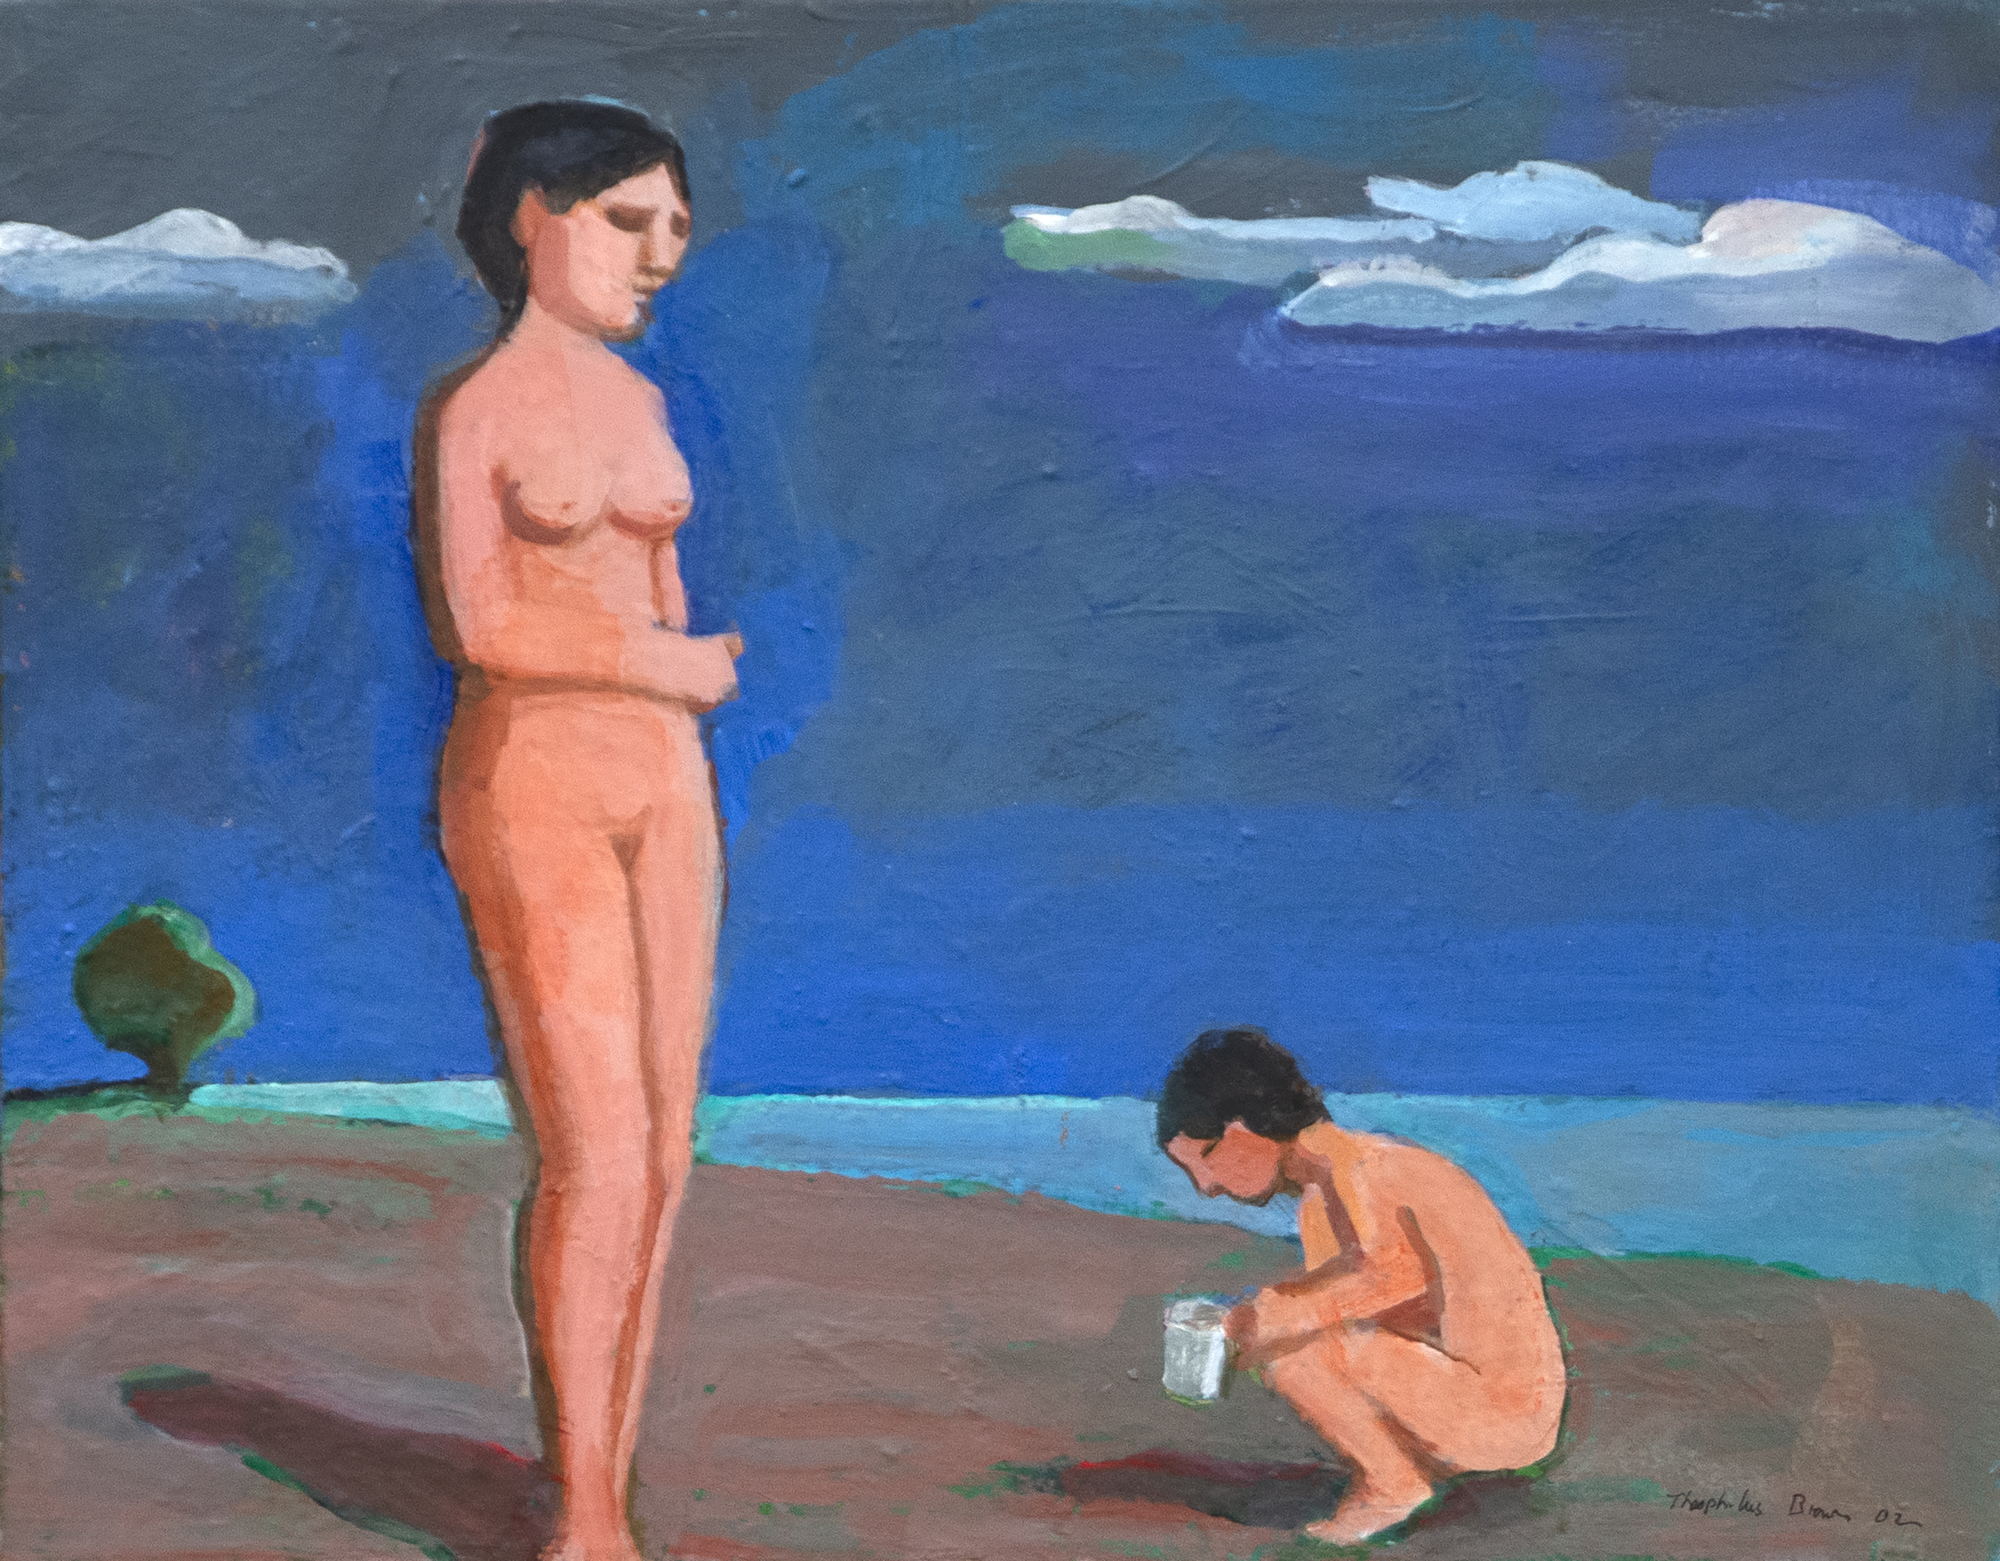 WILLIAM THEOPHILUS BROWN - Untitled (Nudes with Tree) (Woman and Child) - acrylic on canvas - 11 x 14 in.